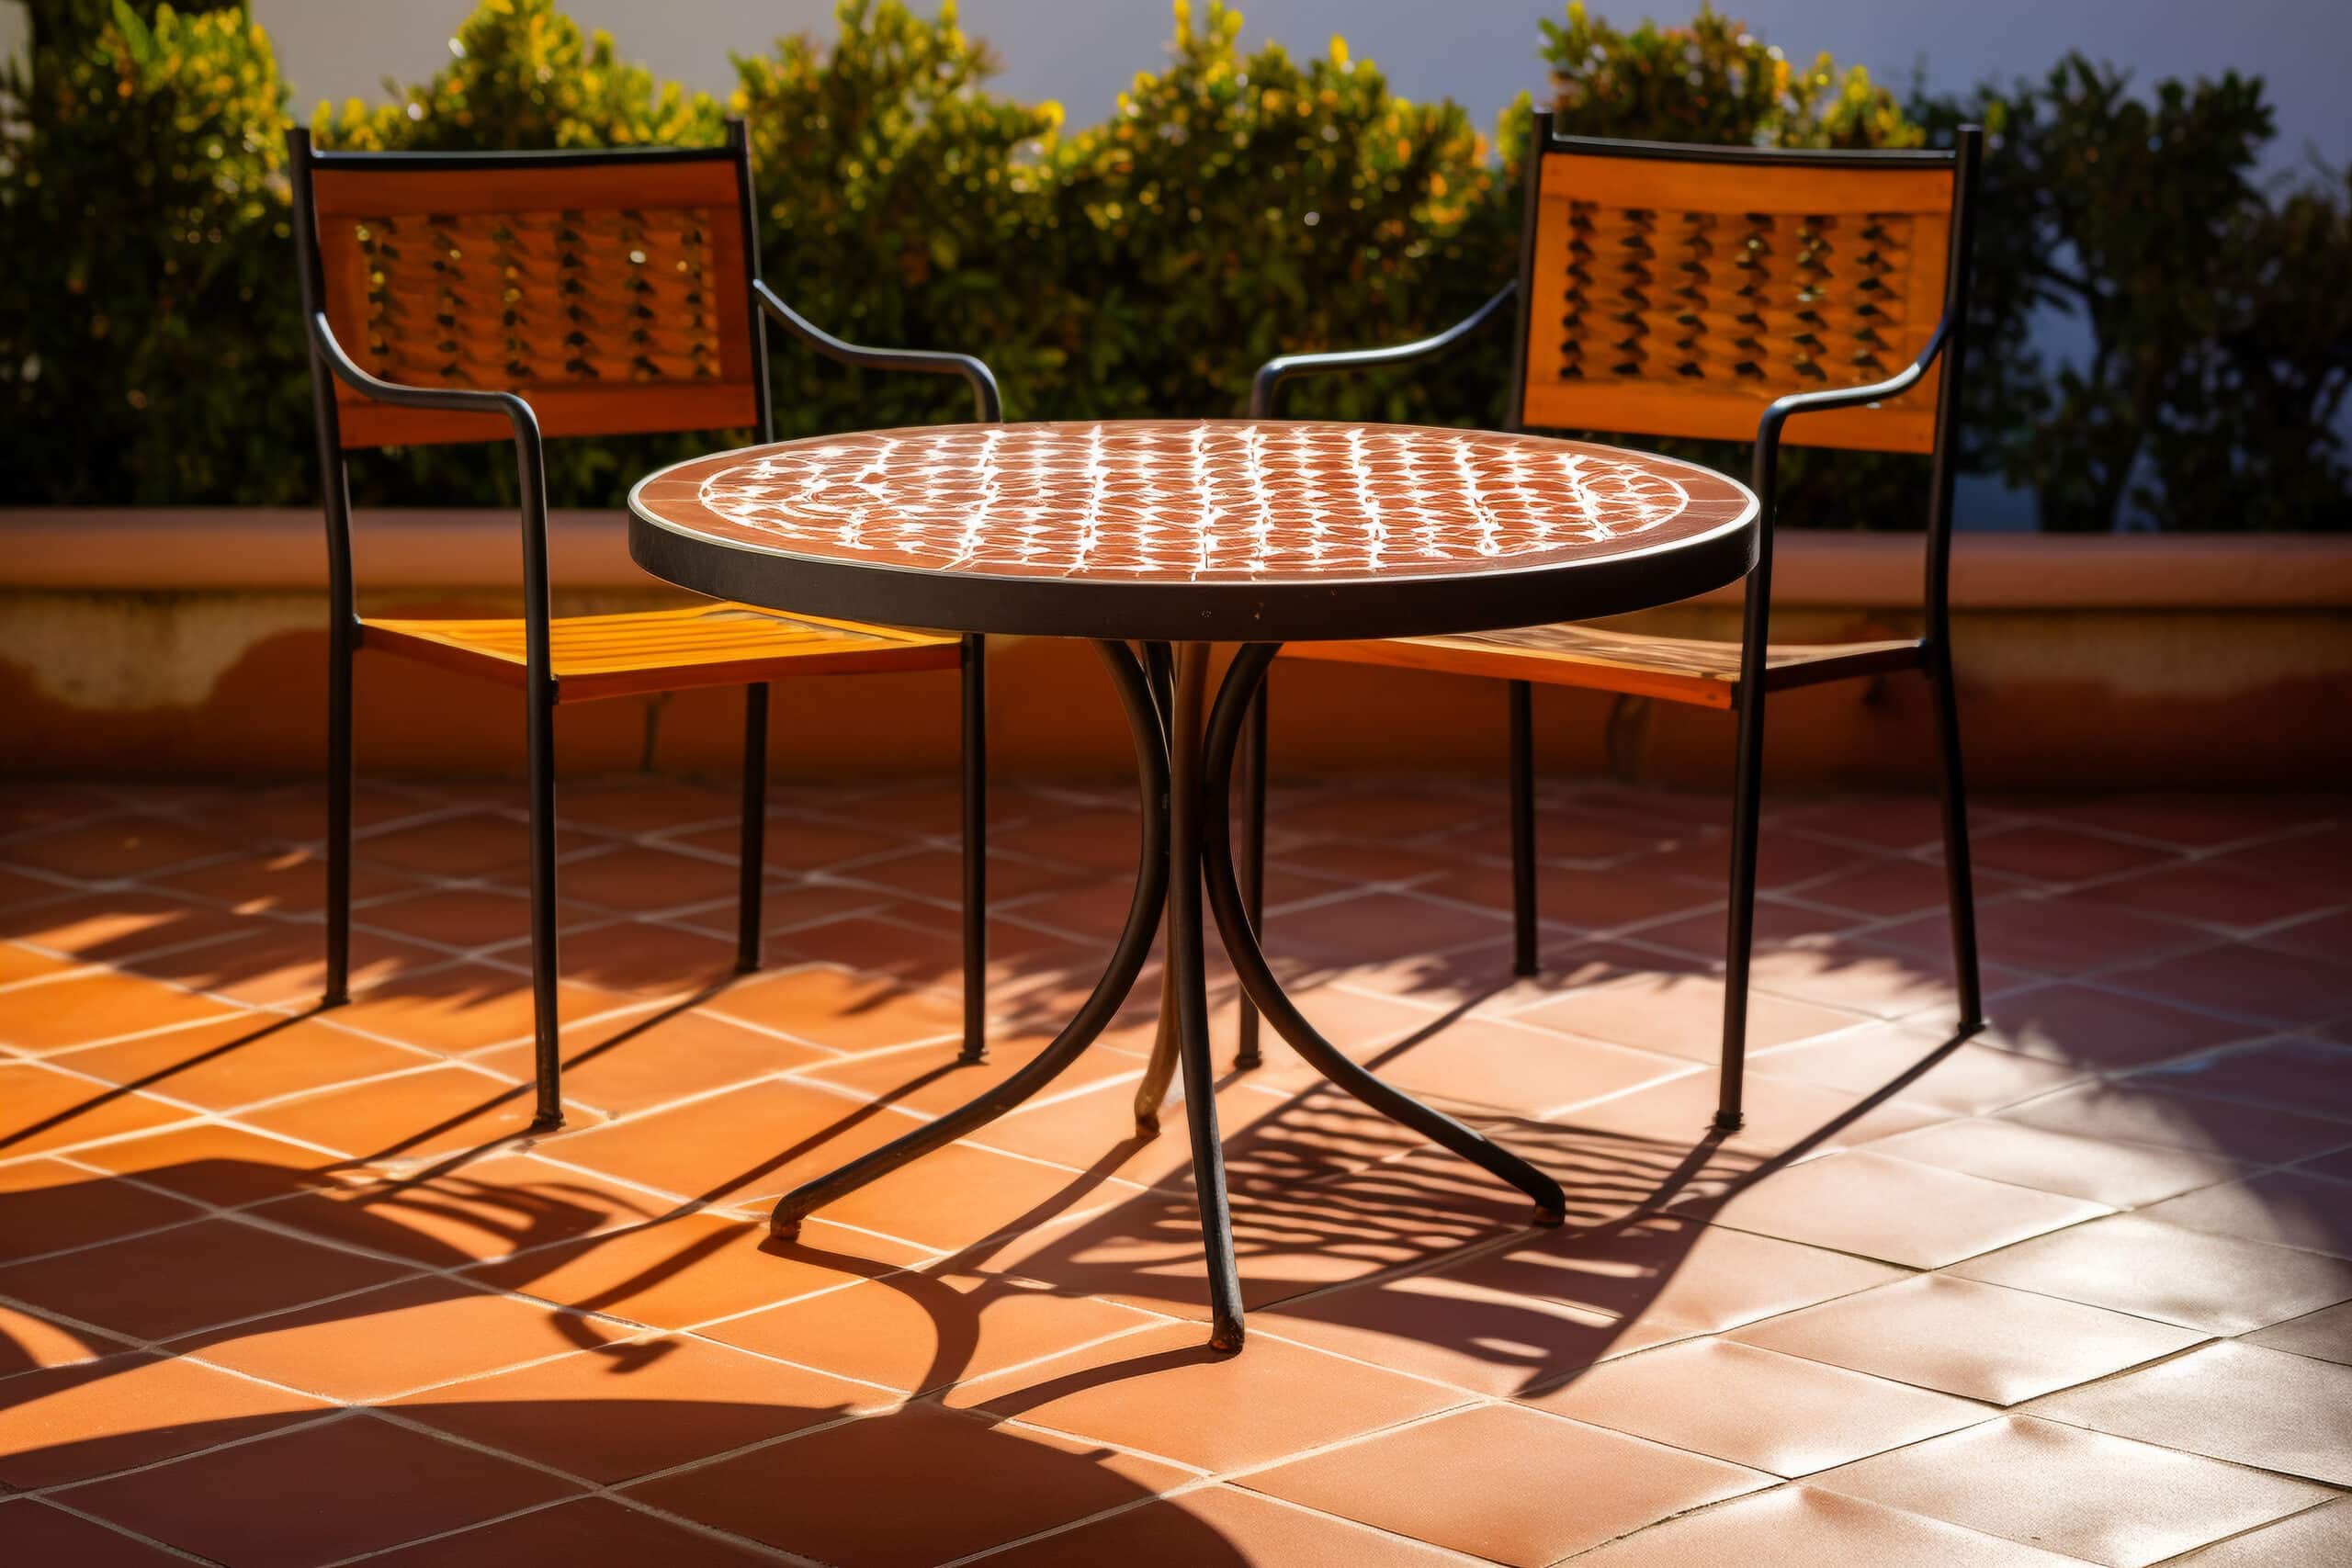 www.appr.com : How To Clean Patio Furniture Mesh?